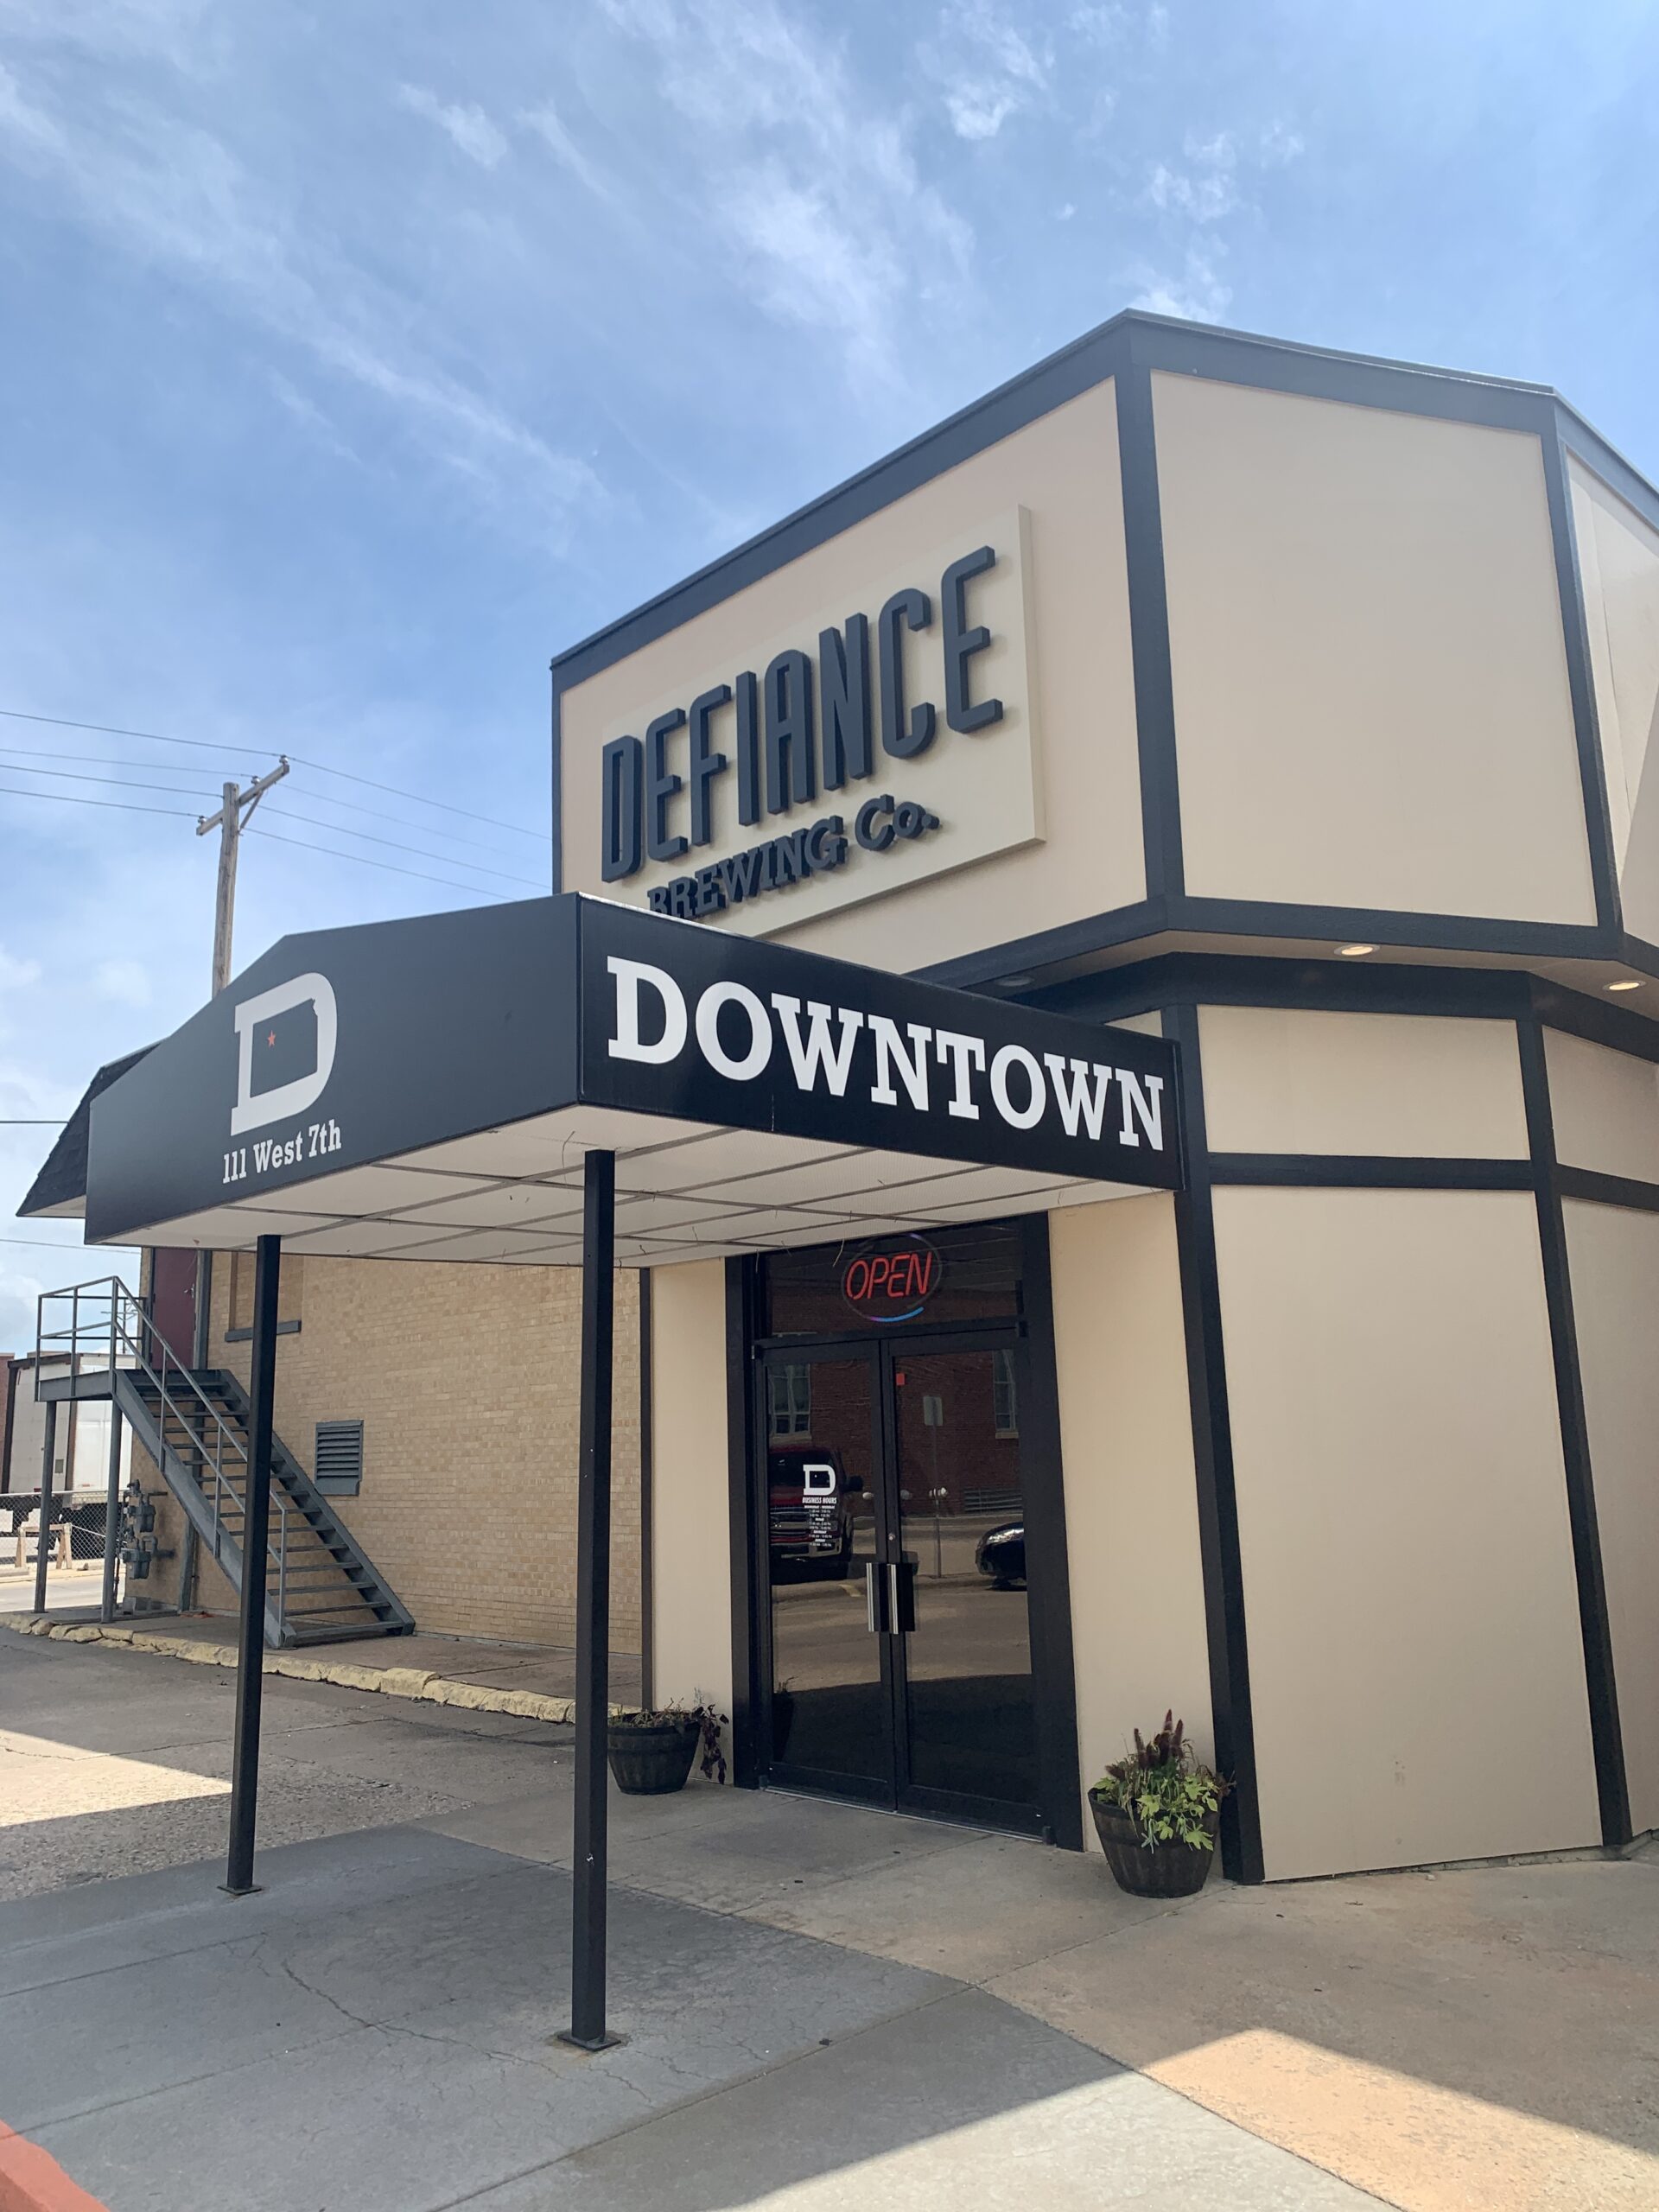 Defiance Brewing Company